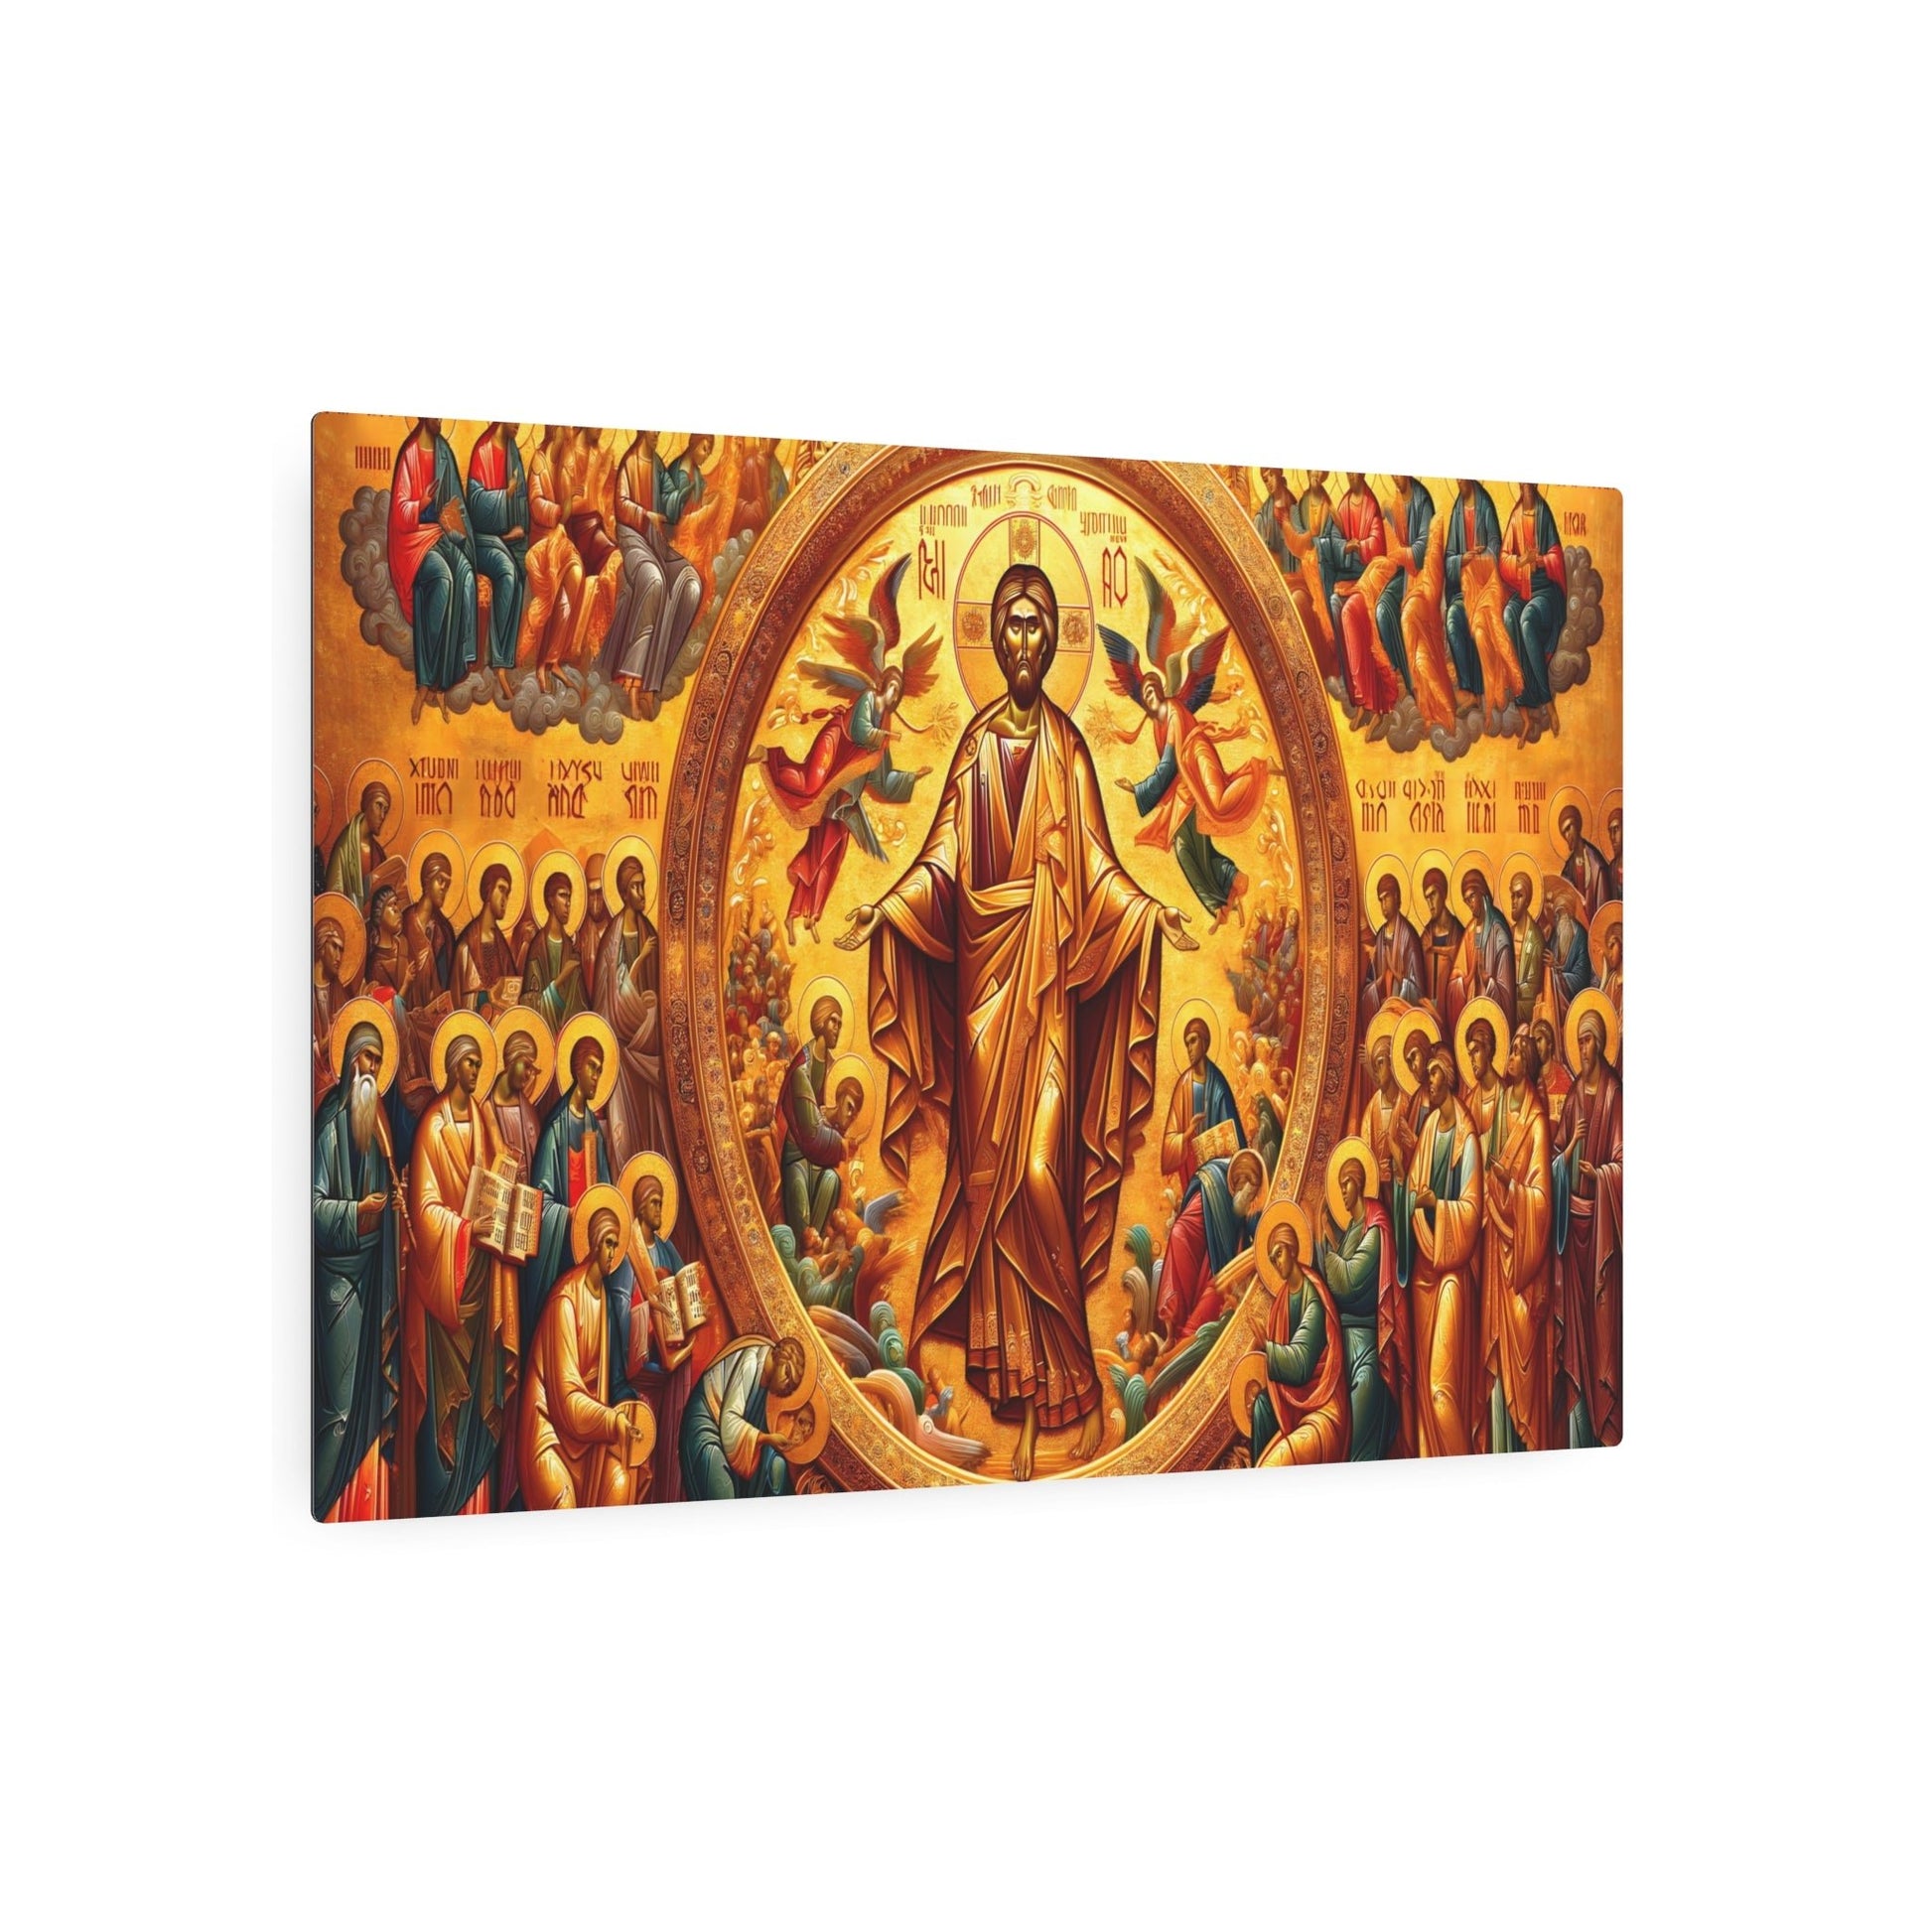 "Religious Byzantine Art Style Masterpiece with Luxurious Gold Backgrounds - Non-Western Global Styles Collection" - Metal Poster Art 36″ x 24″ (Horizontal) 0.12''